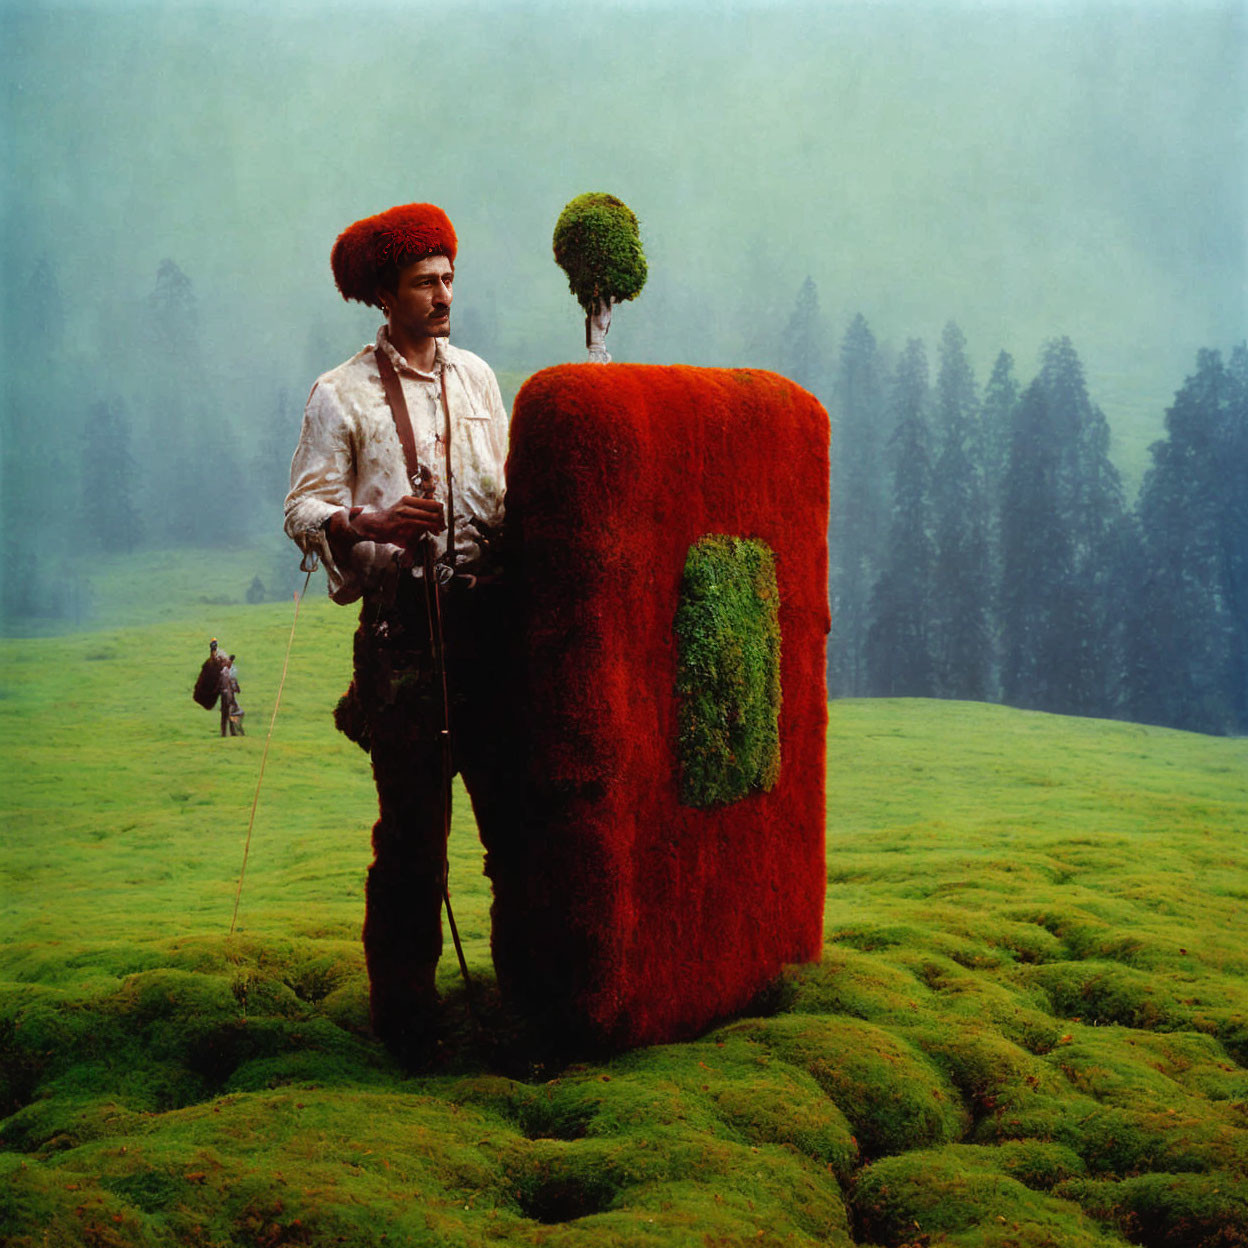 Traditional Attire Man with Moss-Covered Book-Like Object in Green Field